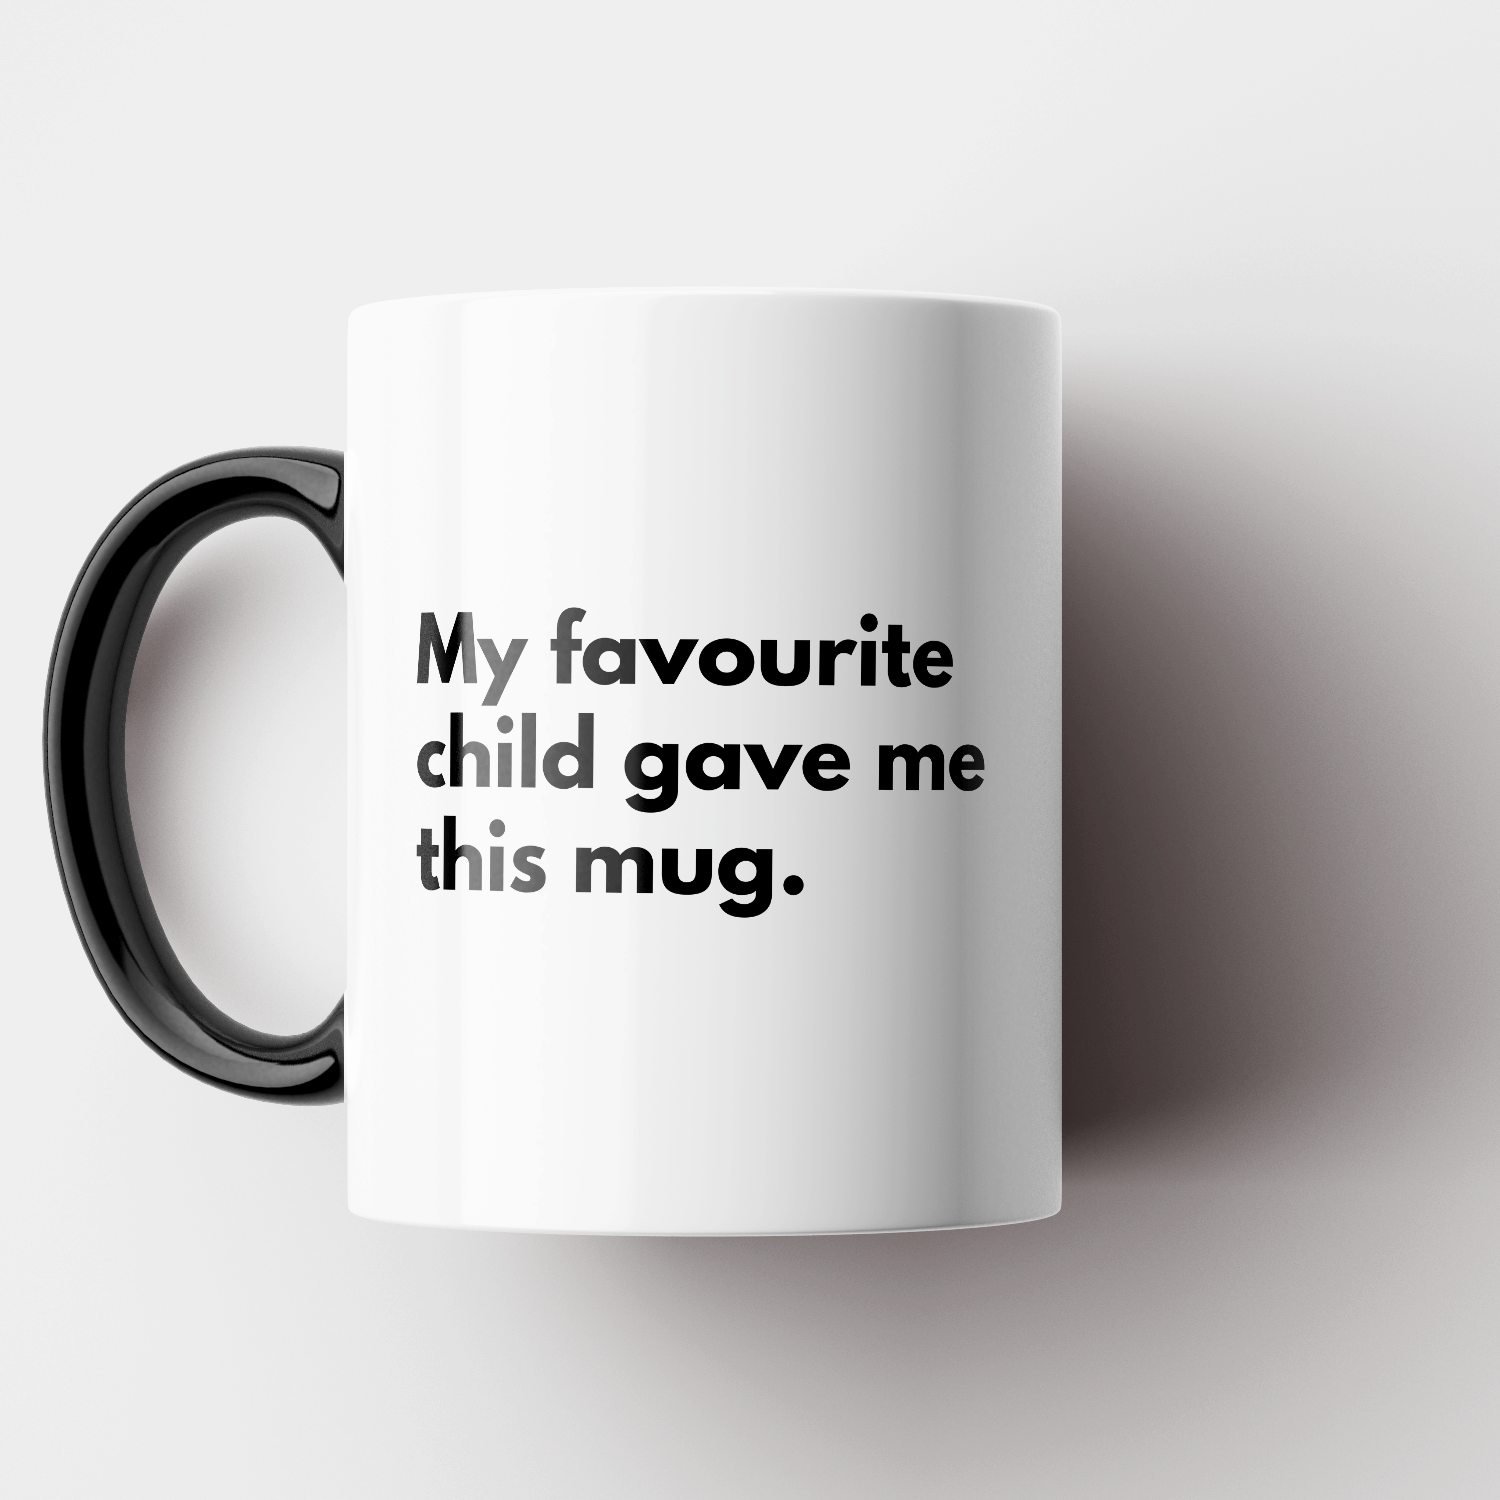 TIGC The Inappropriate Gift Co My favourite child gave me this mug